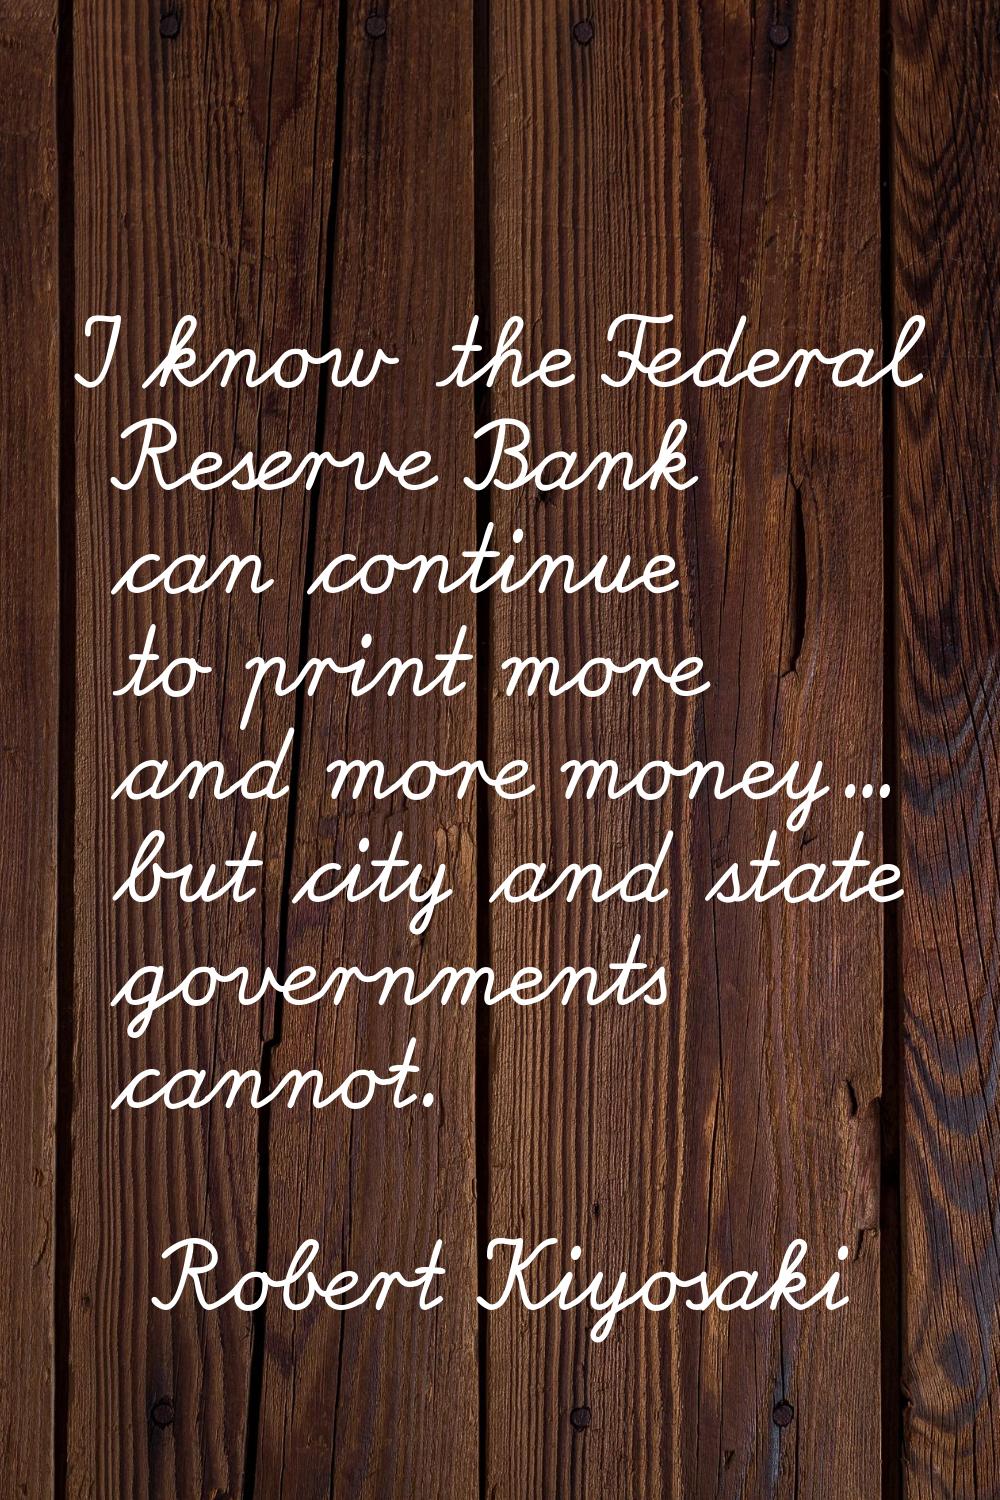 I know the Federal Reserve Bank can continue to print more and more money... but city and state gov